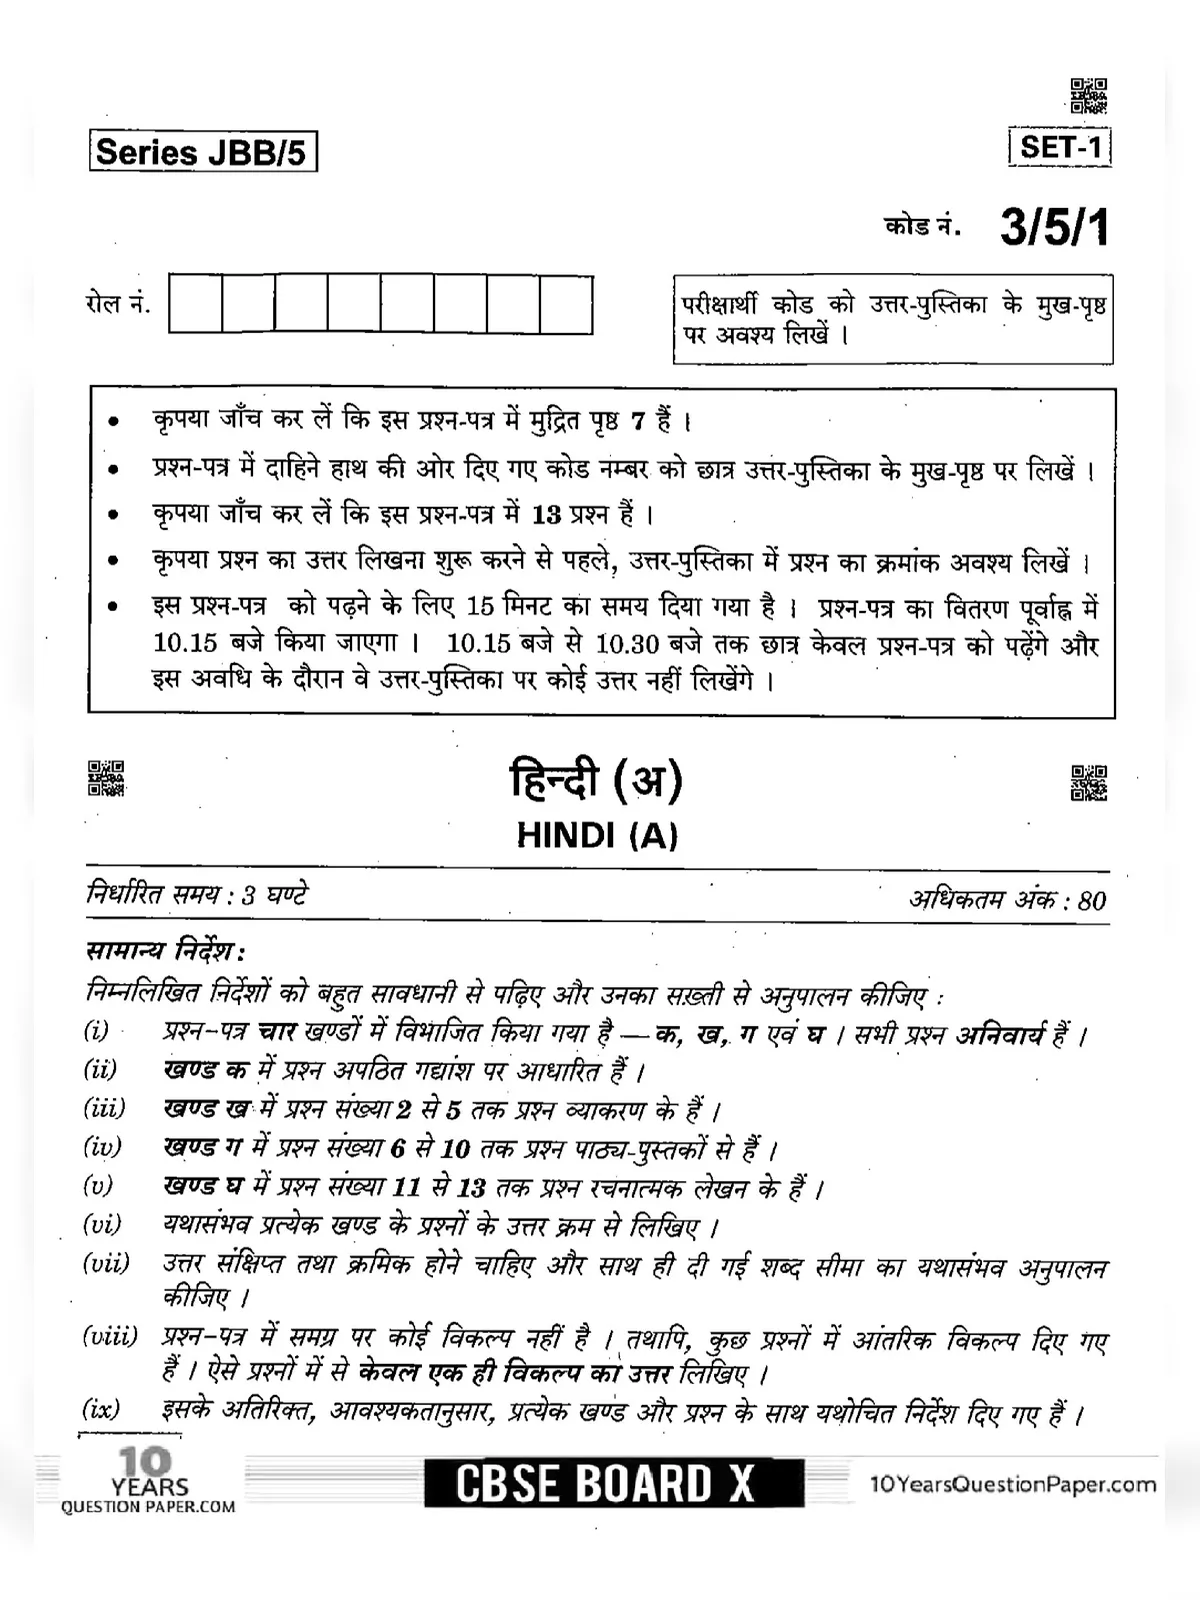 CBSE Class 10 Hindi Question Paper 2020 With Answer Key